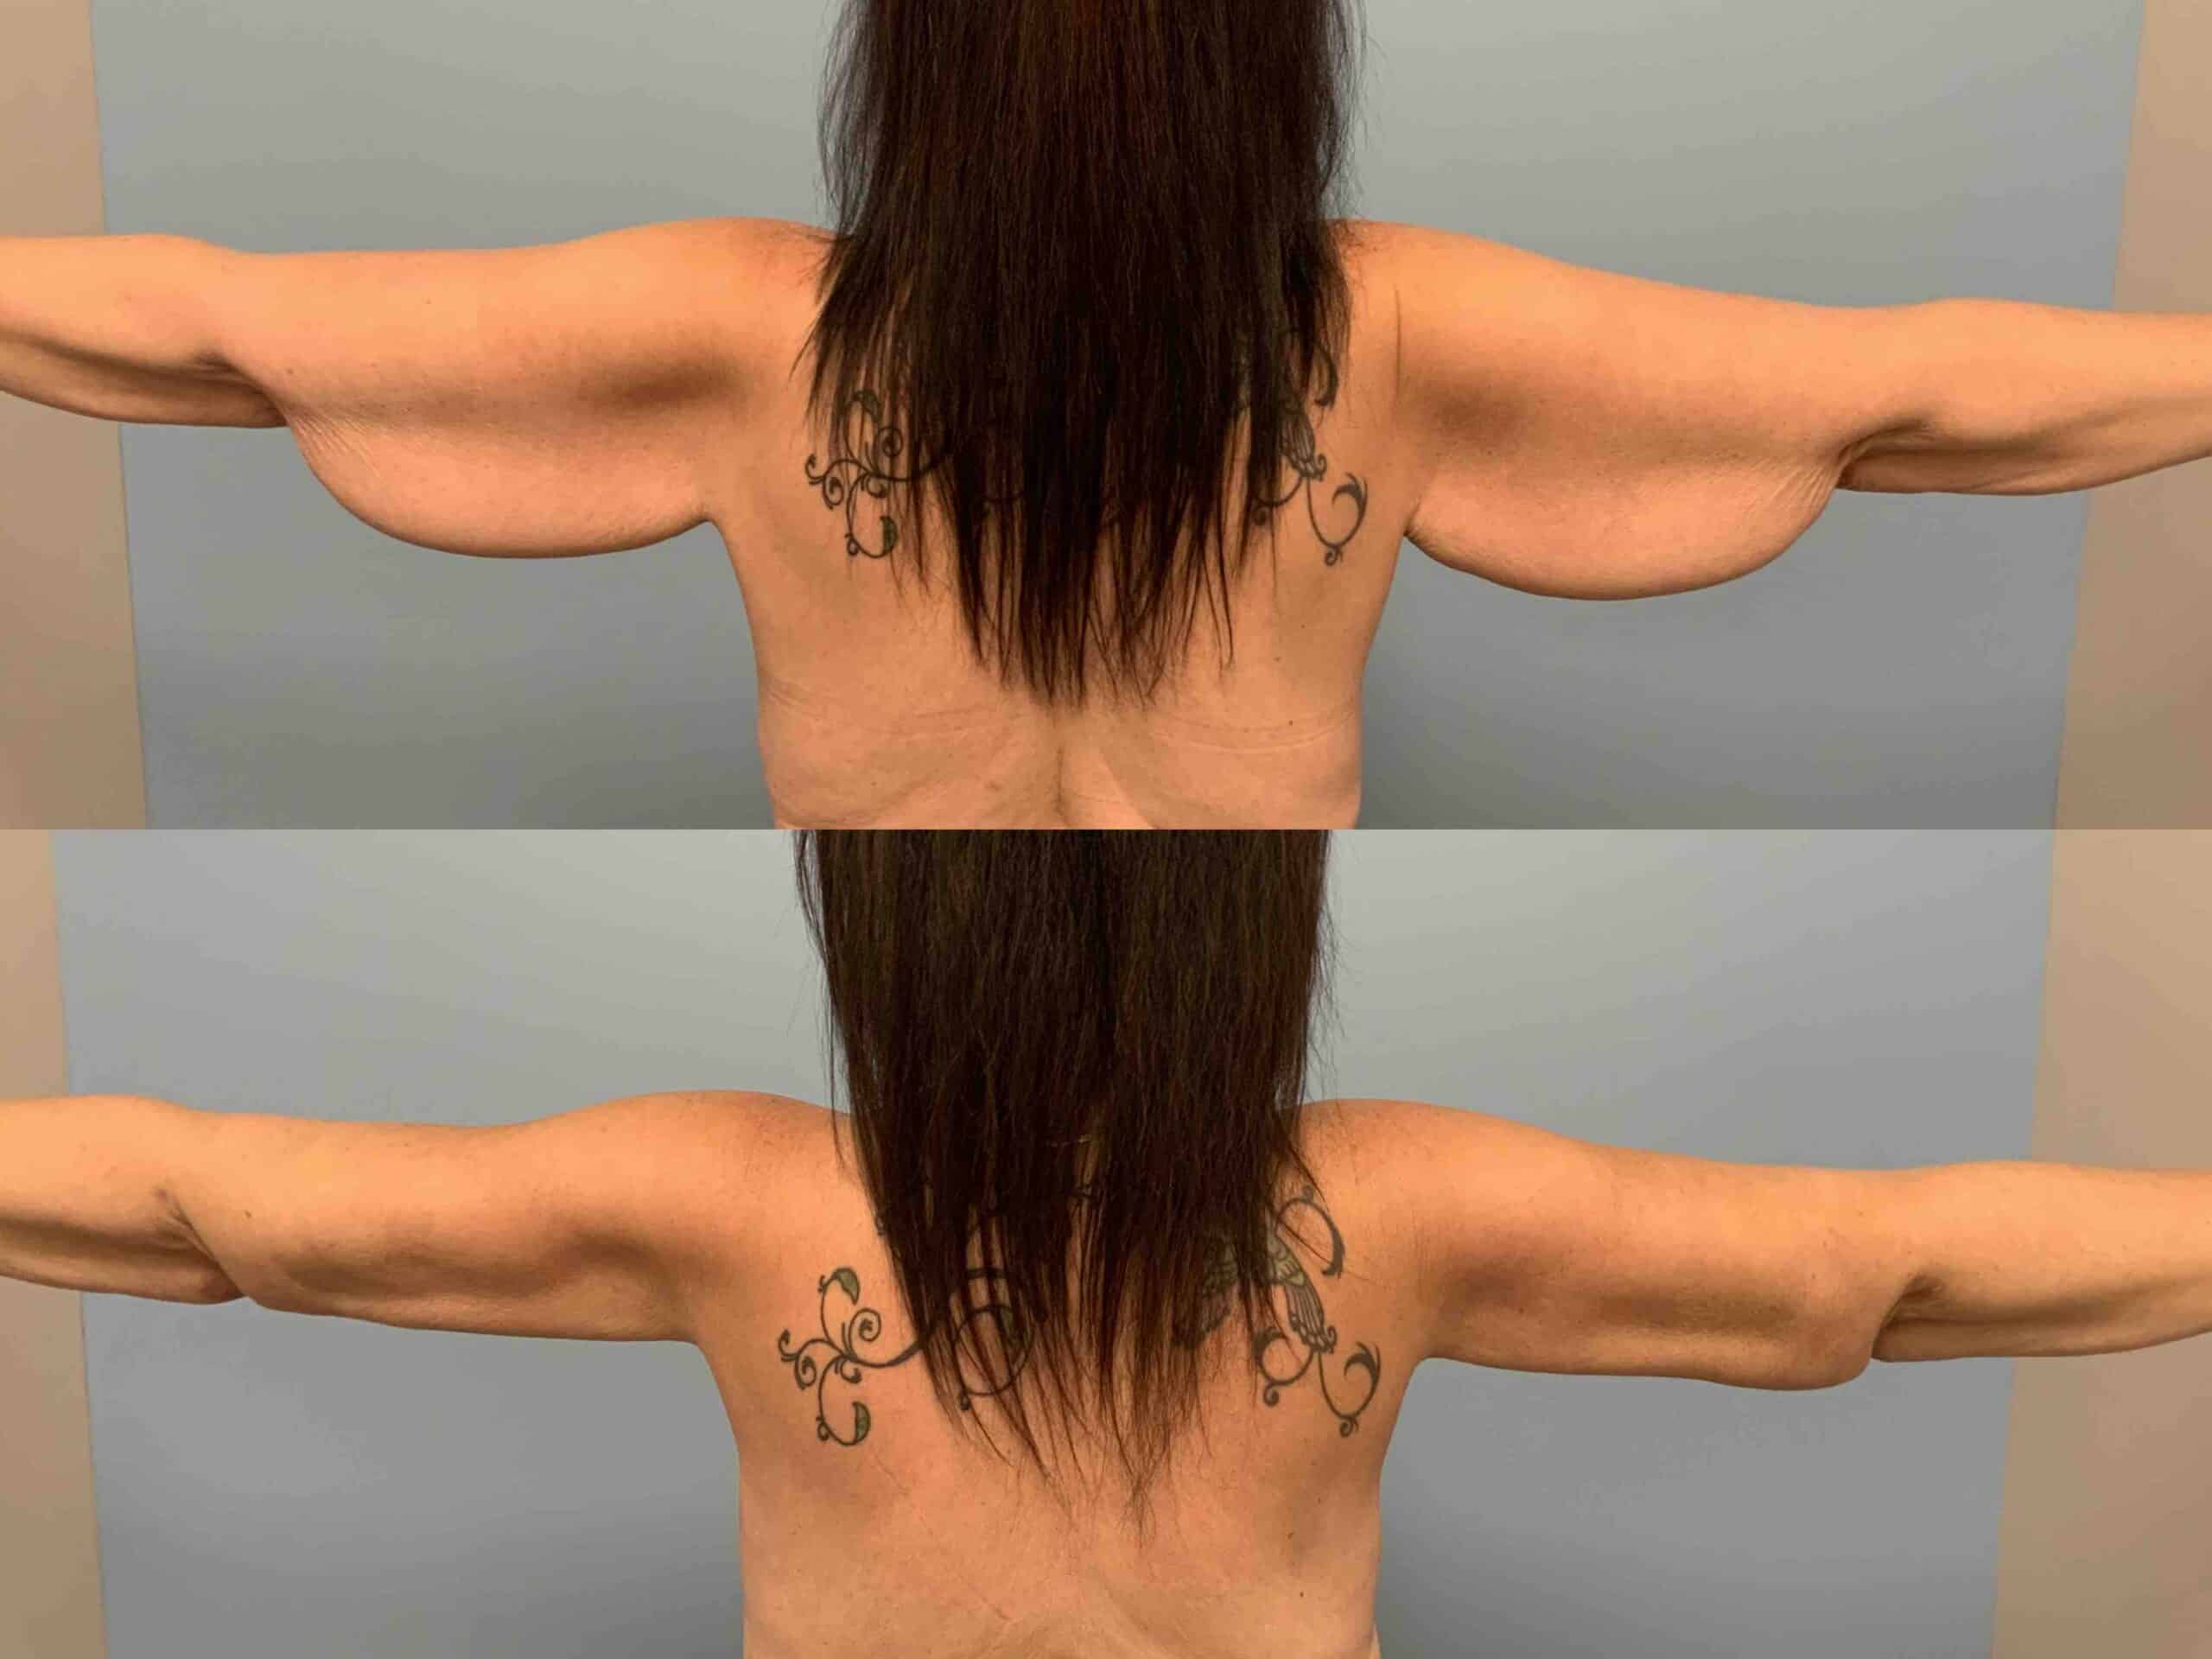 Before and after, 3 mo post op from brachioplasty VASER arms performed by Dr. Paul Vanek (back view)